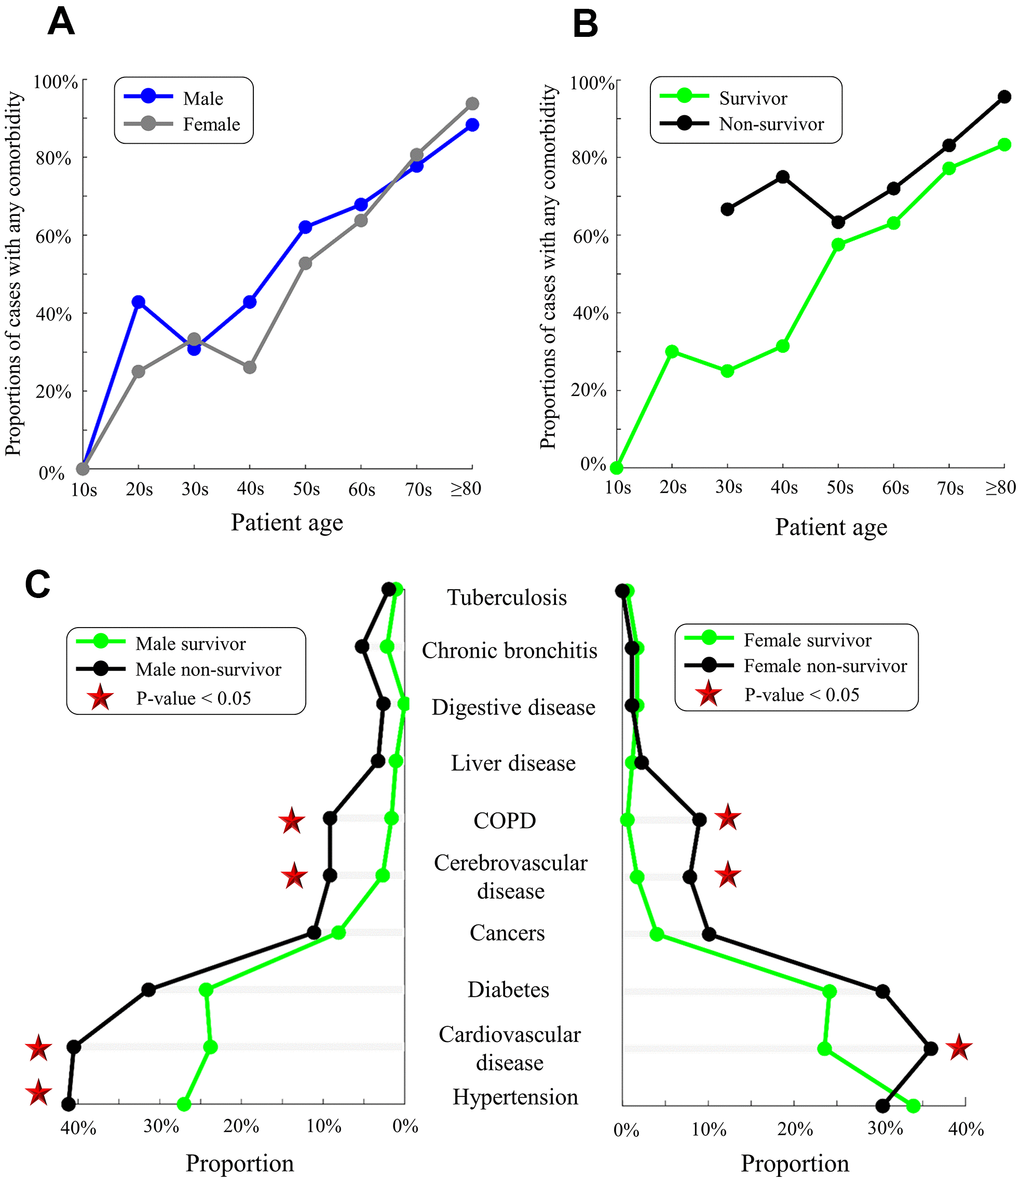 Pre-existing comorbidities in males/females and survivors/non-survivors. (A) Proportions of males (blue) and females (gray) with any comorbidity. (B) Proportions of survivors (green) and non-survivors (black) with any comorbidity. (C) Comorbidities in male survivors/non-survivors (left) and female survivors/non-survivors (right). Red stars indicate the significant difference in proportions between survivors and non-survivors (p-value